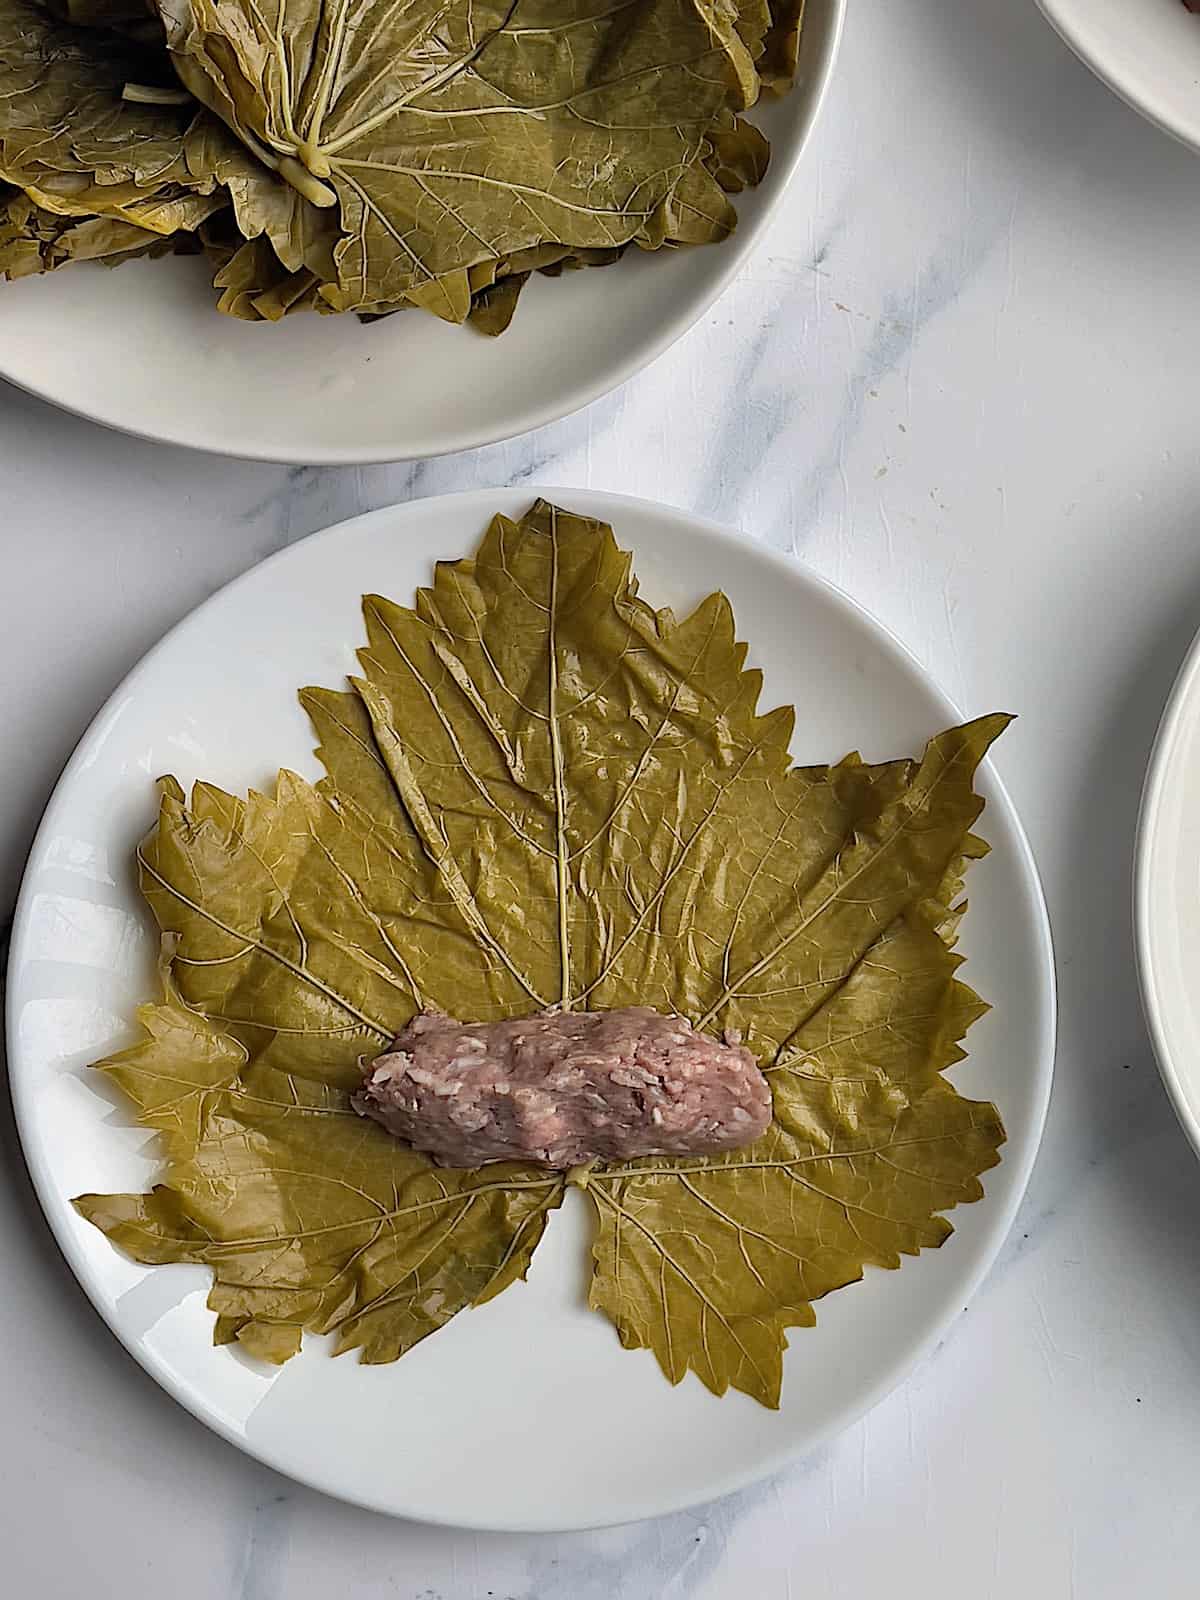 lamb and rice mixture on a flat grape leaf